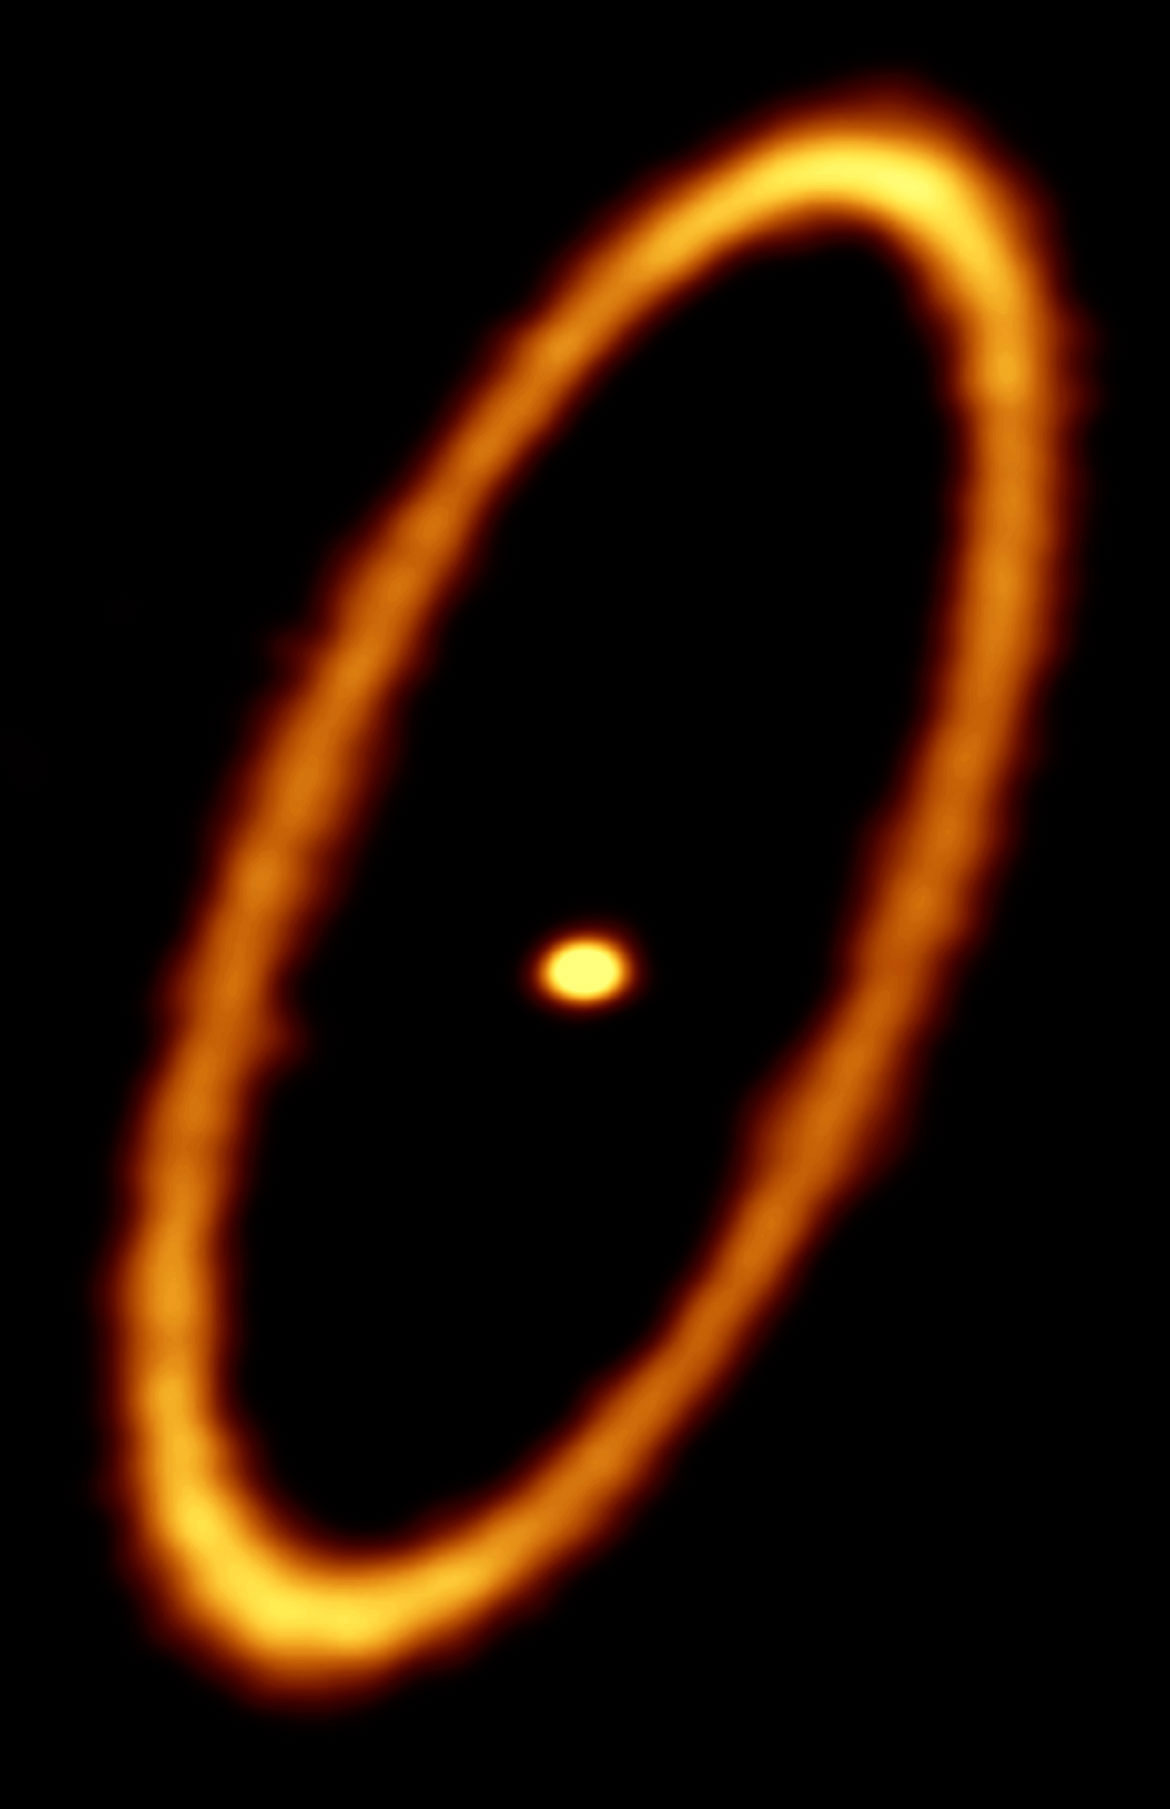 ALMA Views Fomalhaut Star System in Never-Before-Seen Detail